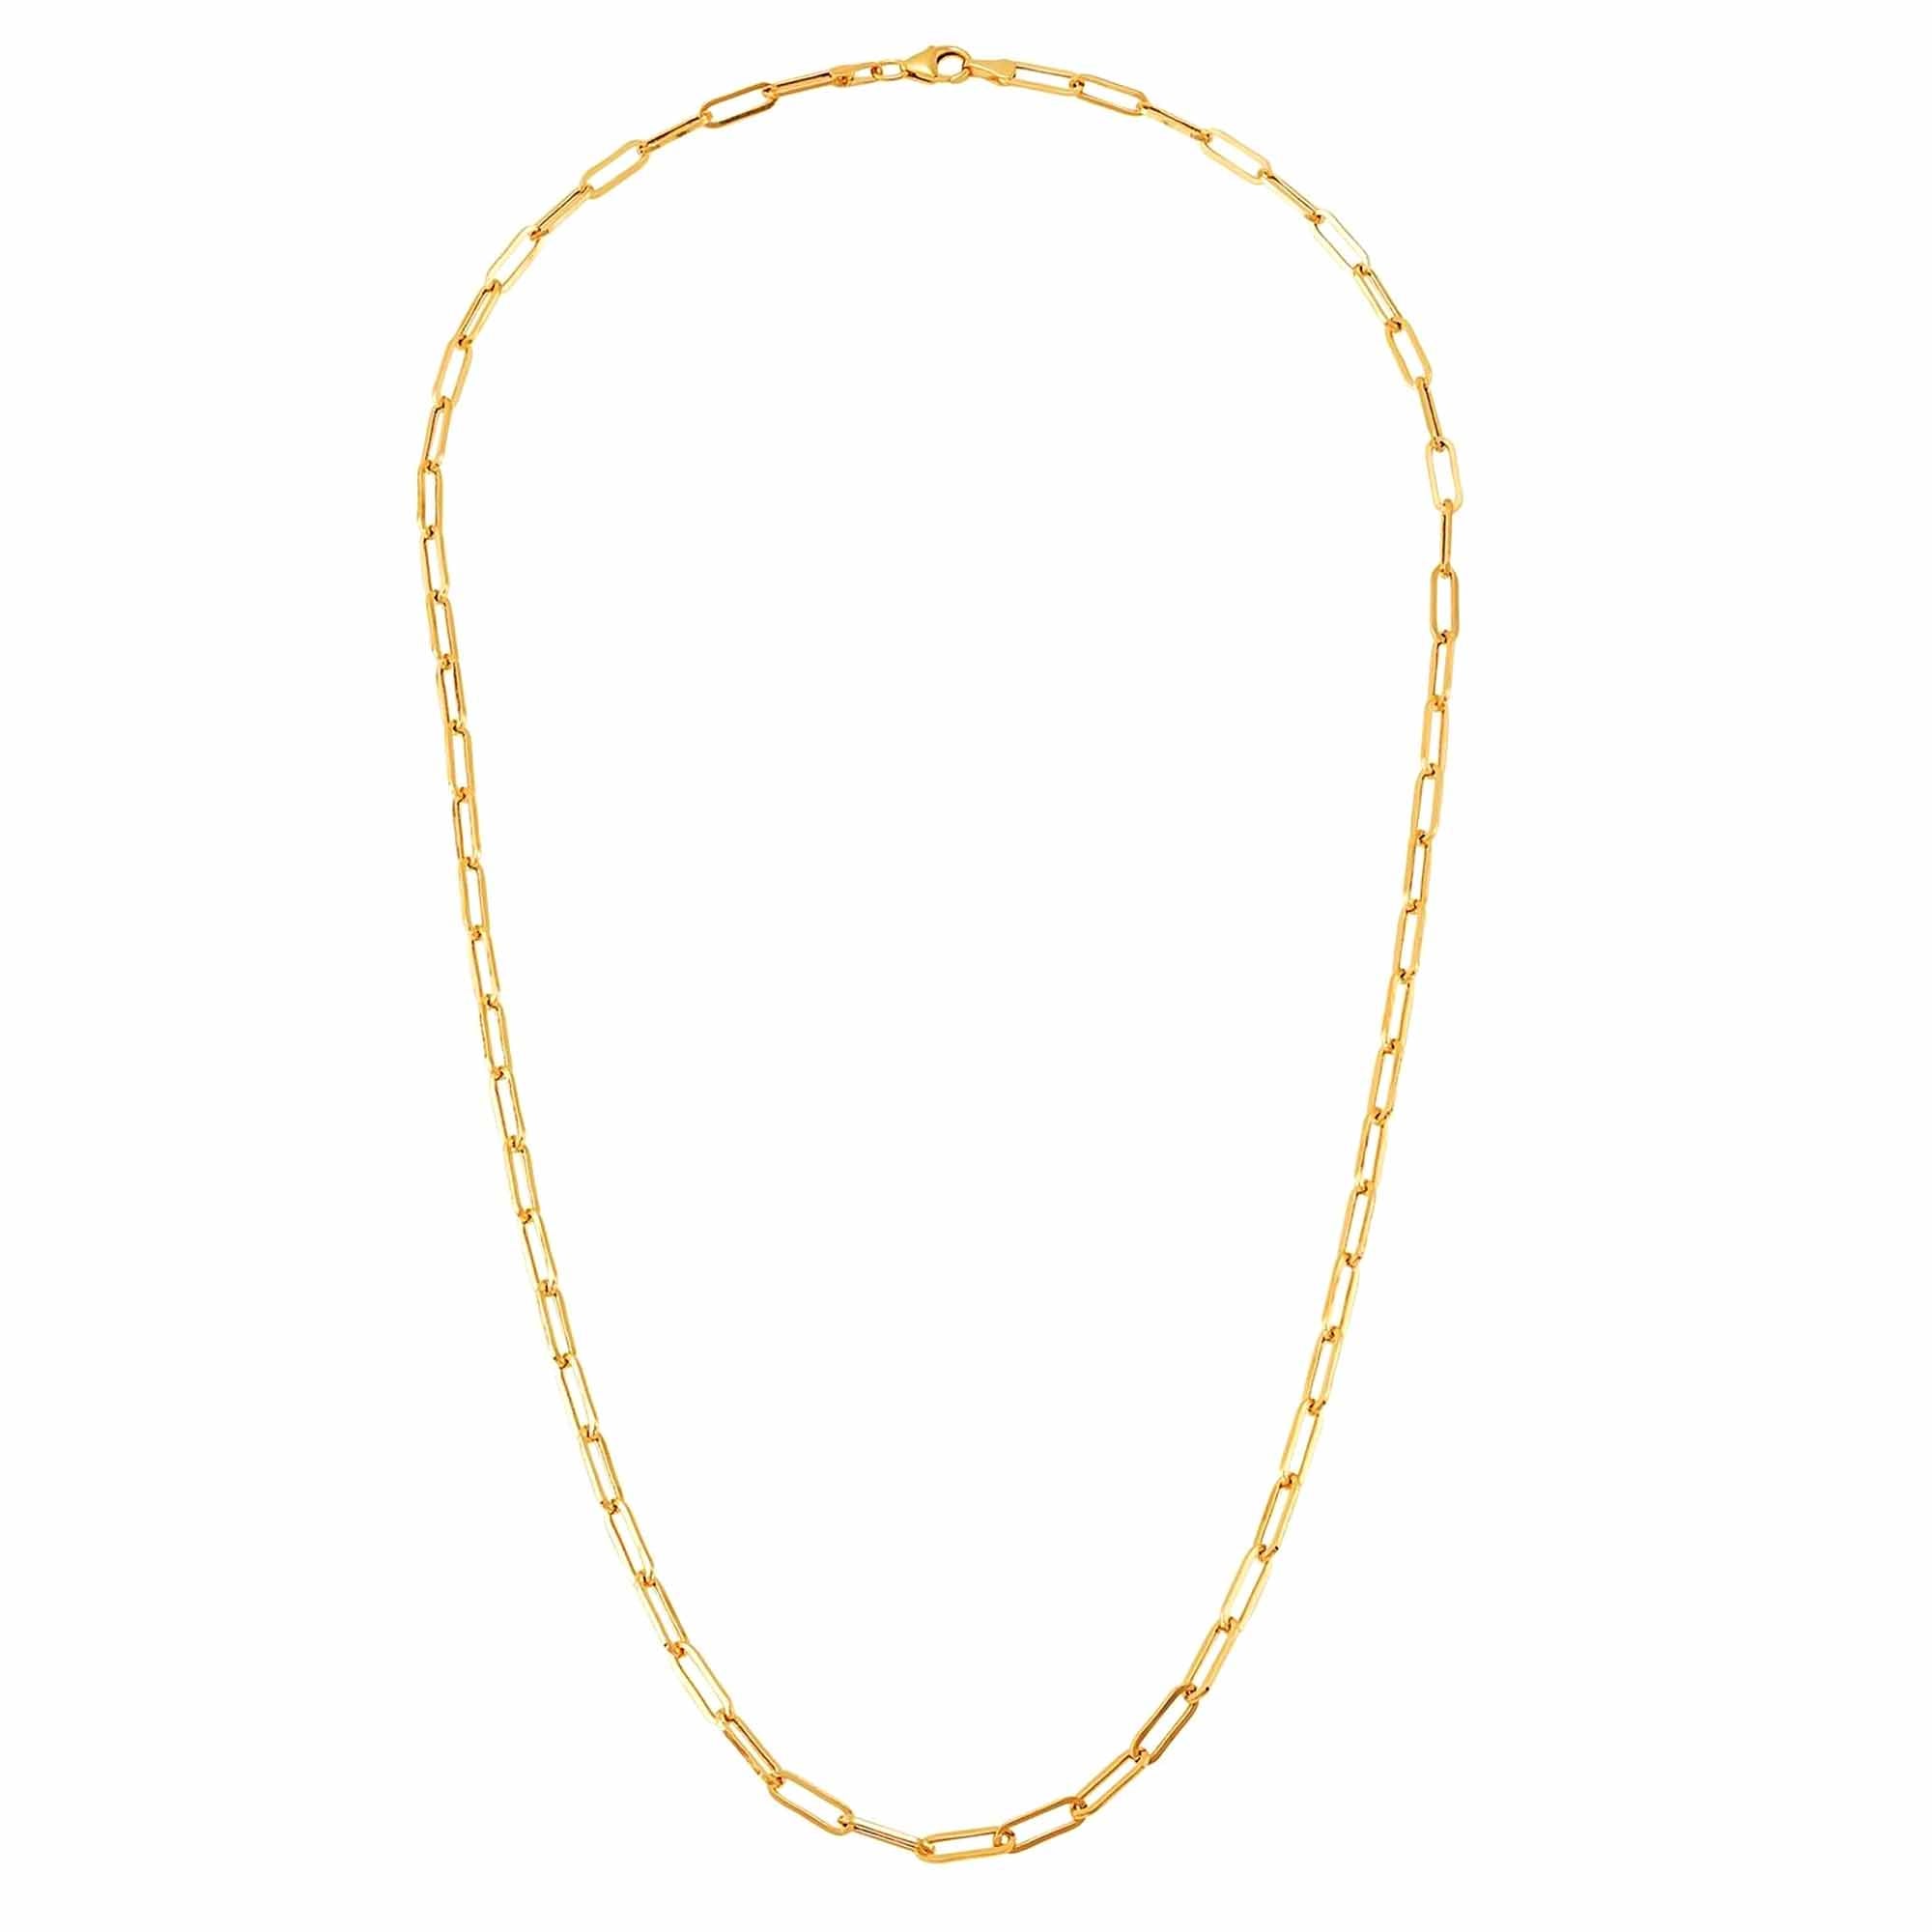 14k Yellow Gold Paperclip Chain Bracelet, 7" fine designer jewelry for men and women